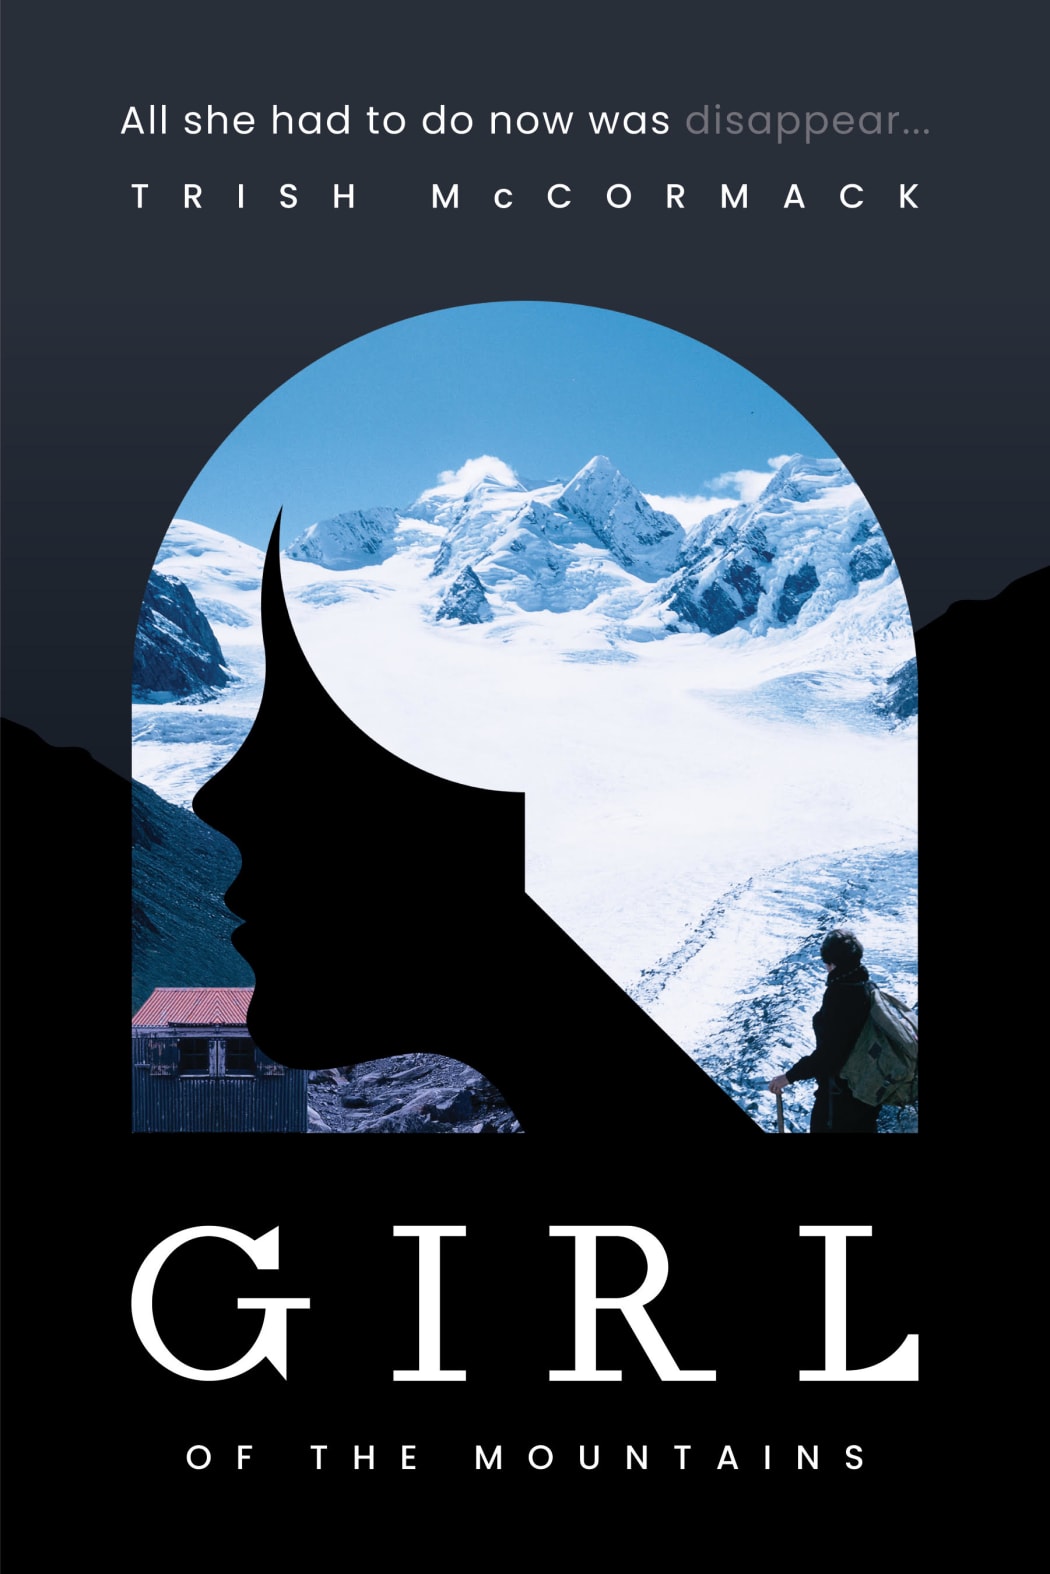 A book cover. It shows a stylised relief of a woman's face, backgrounded by an image of snow-capped mountains. The title is "GIRL OF THE MOUNTAINS".